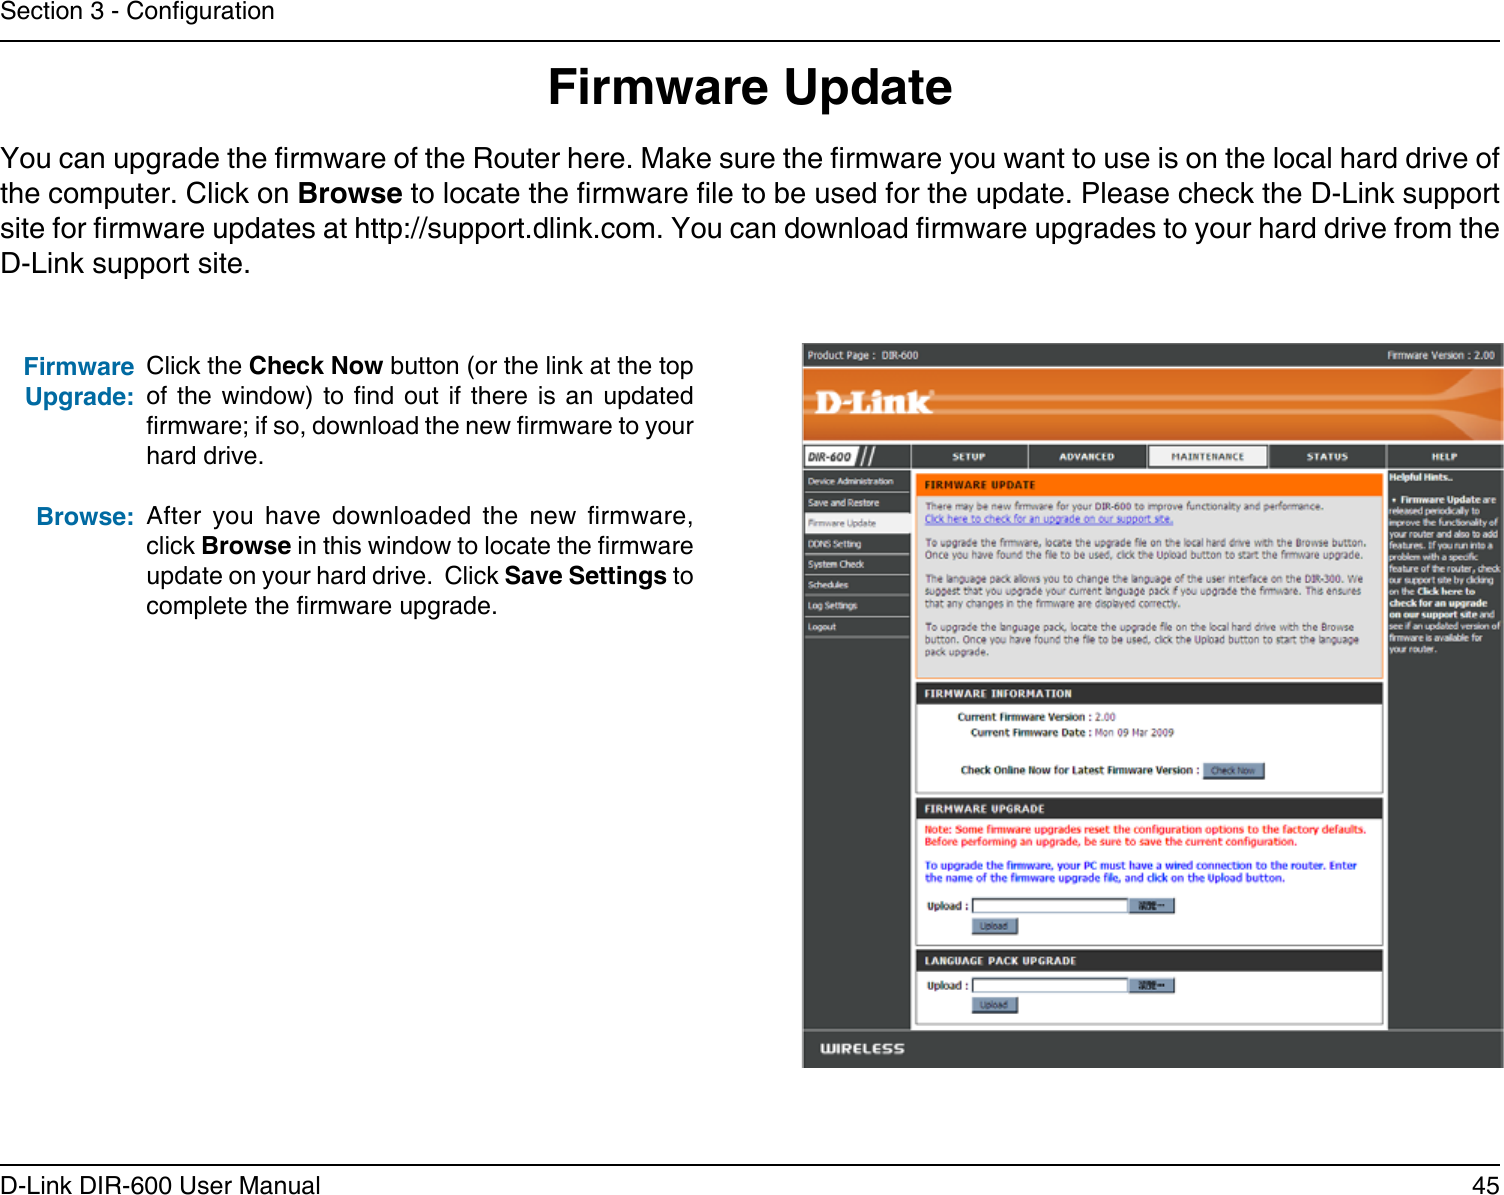 45D-Link DIR-600 User ManualSection 3 - CongurationFirmware UpdateClick the Check Now button (or the link at the top of the  window) to nd  out  if there is  an updated rmware; if so, download the new rmware to your hard drive.After  you  have  downloaded  the  new  rmware, click Browse in this window to locate the rmware update on your hard drive.  Click Save Settings to complete the rmware upgrade.Firmware Upgrade:Browse:You can upgrade the rmware of the Router here. Make sure the rmware you want to use is on the local hard drive of the computer. Click on Browse to locate the rmware le to be used for the update. Please check the D-Link support site for rmware updates at http://support.dlink.com. You can download rmware upgrades to your hard drive from the D-Link support site.